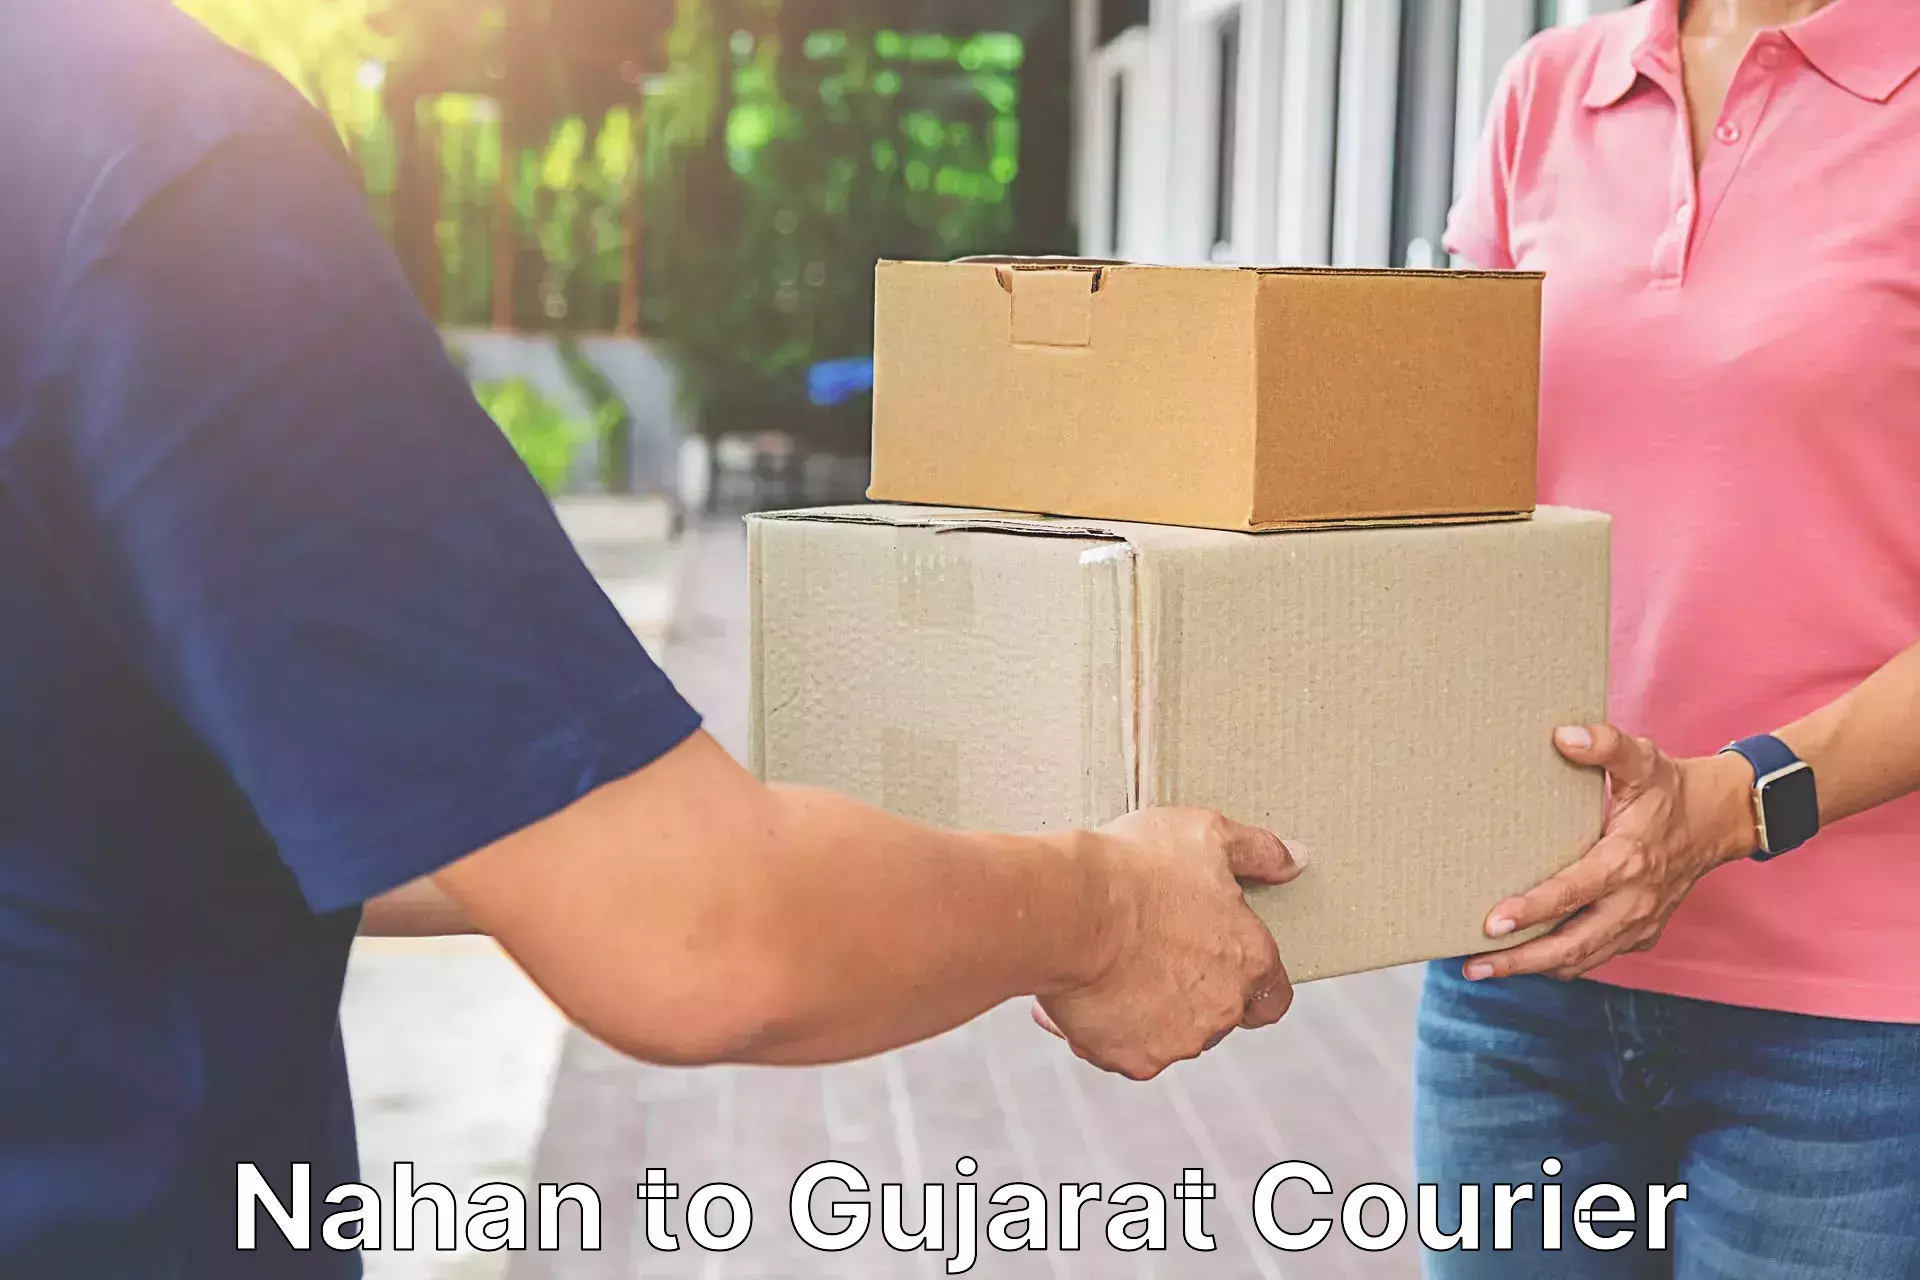 Global courier networks Nahan to Ahmedabad